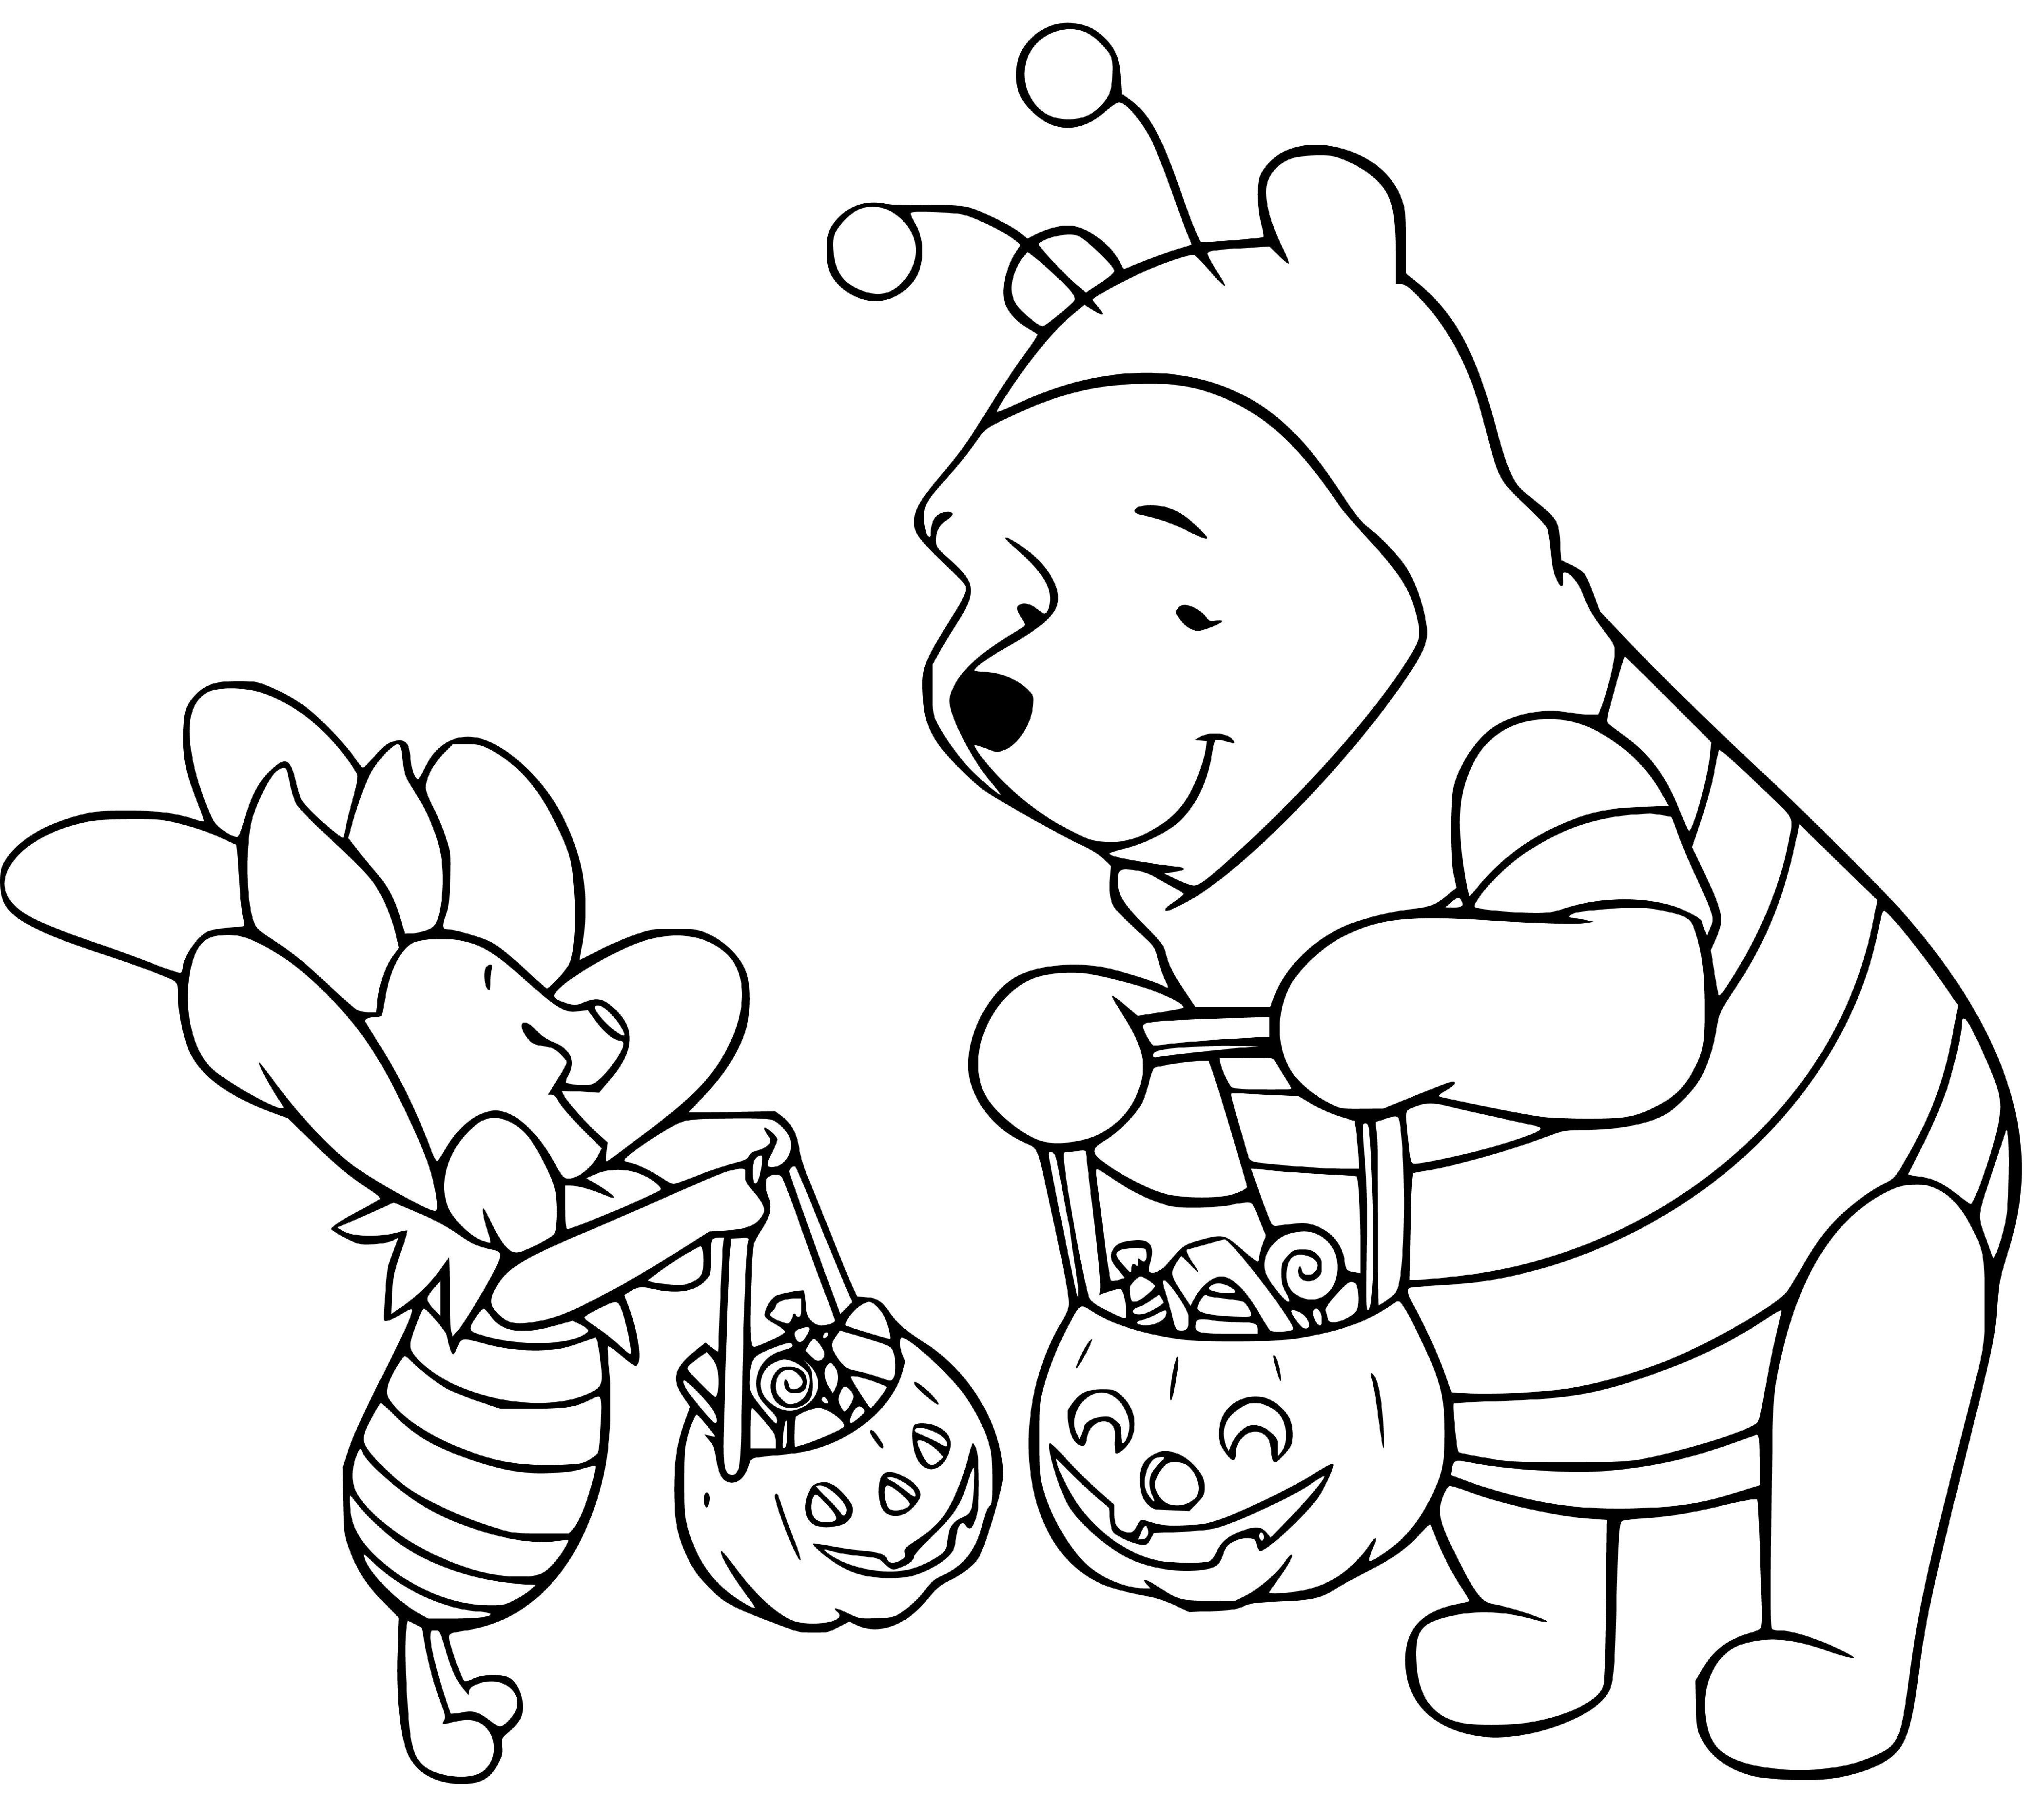 Winnie The Pooh Halloween Coloring Page for Kids Printable free - SheetalColor.com